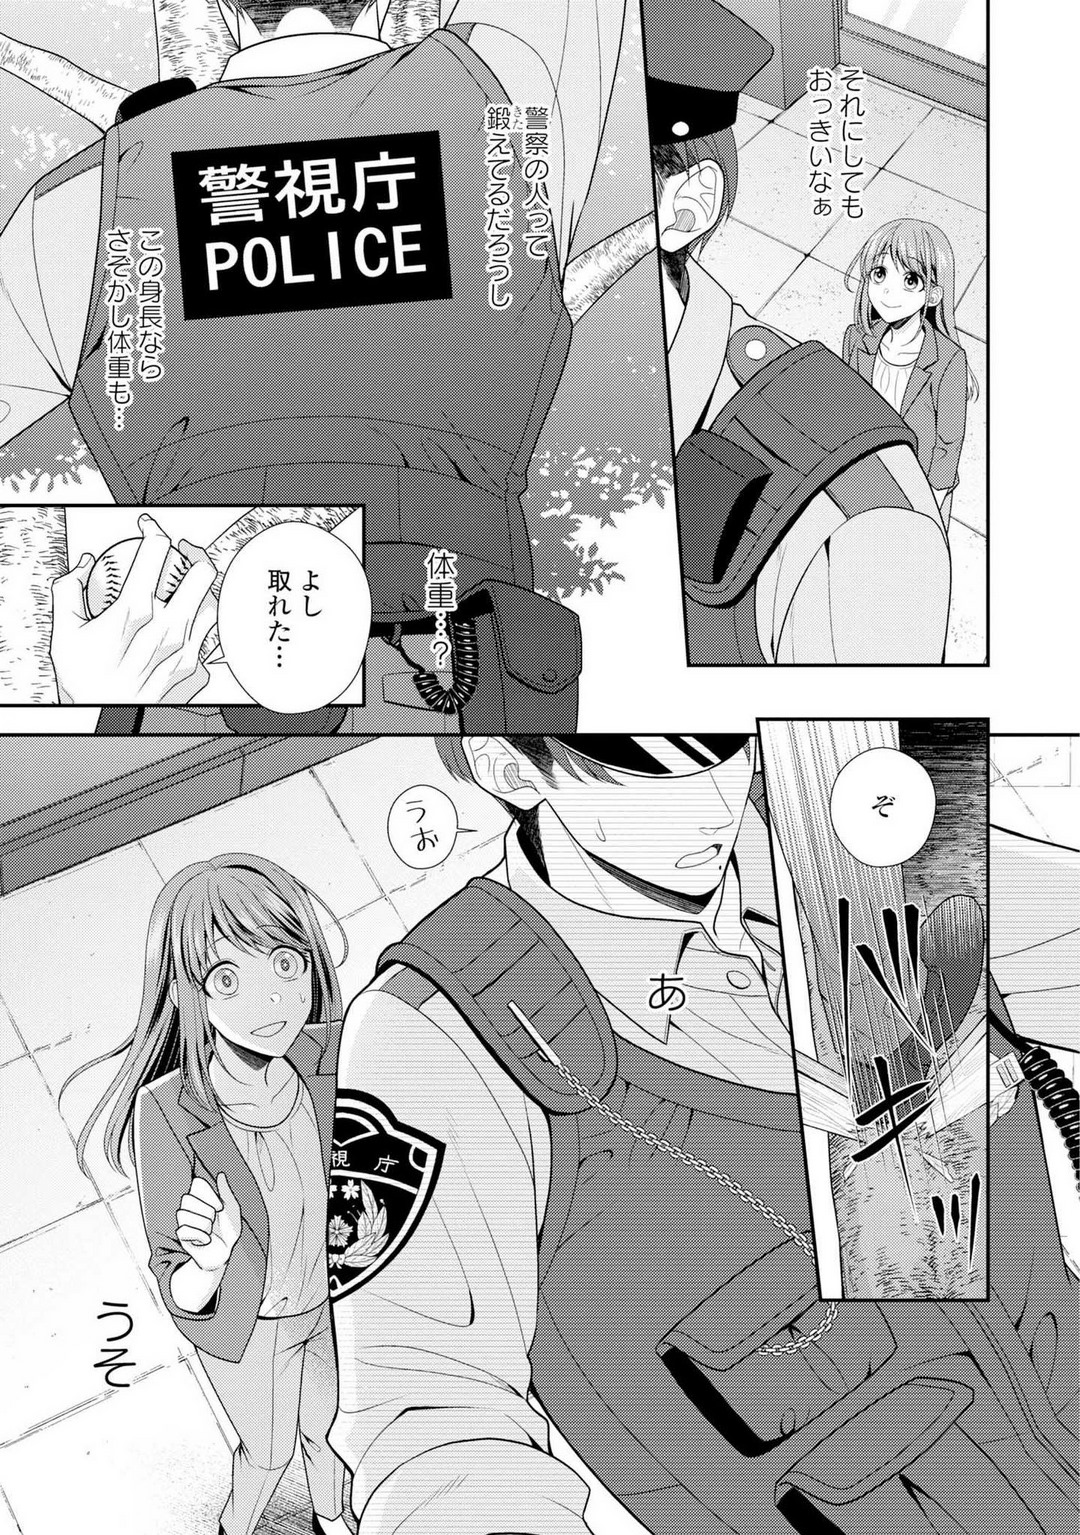 That Police Officer Is Sometimes ABeast 0001 00010